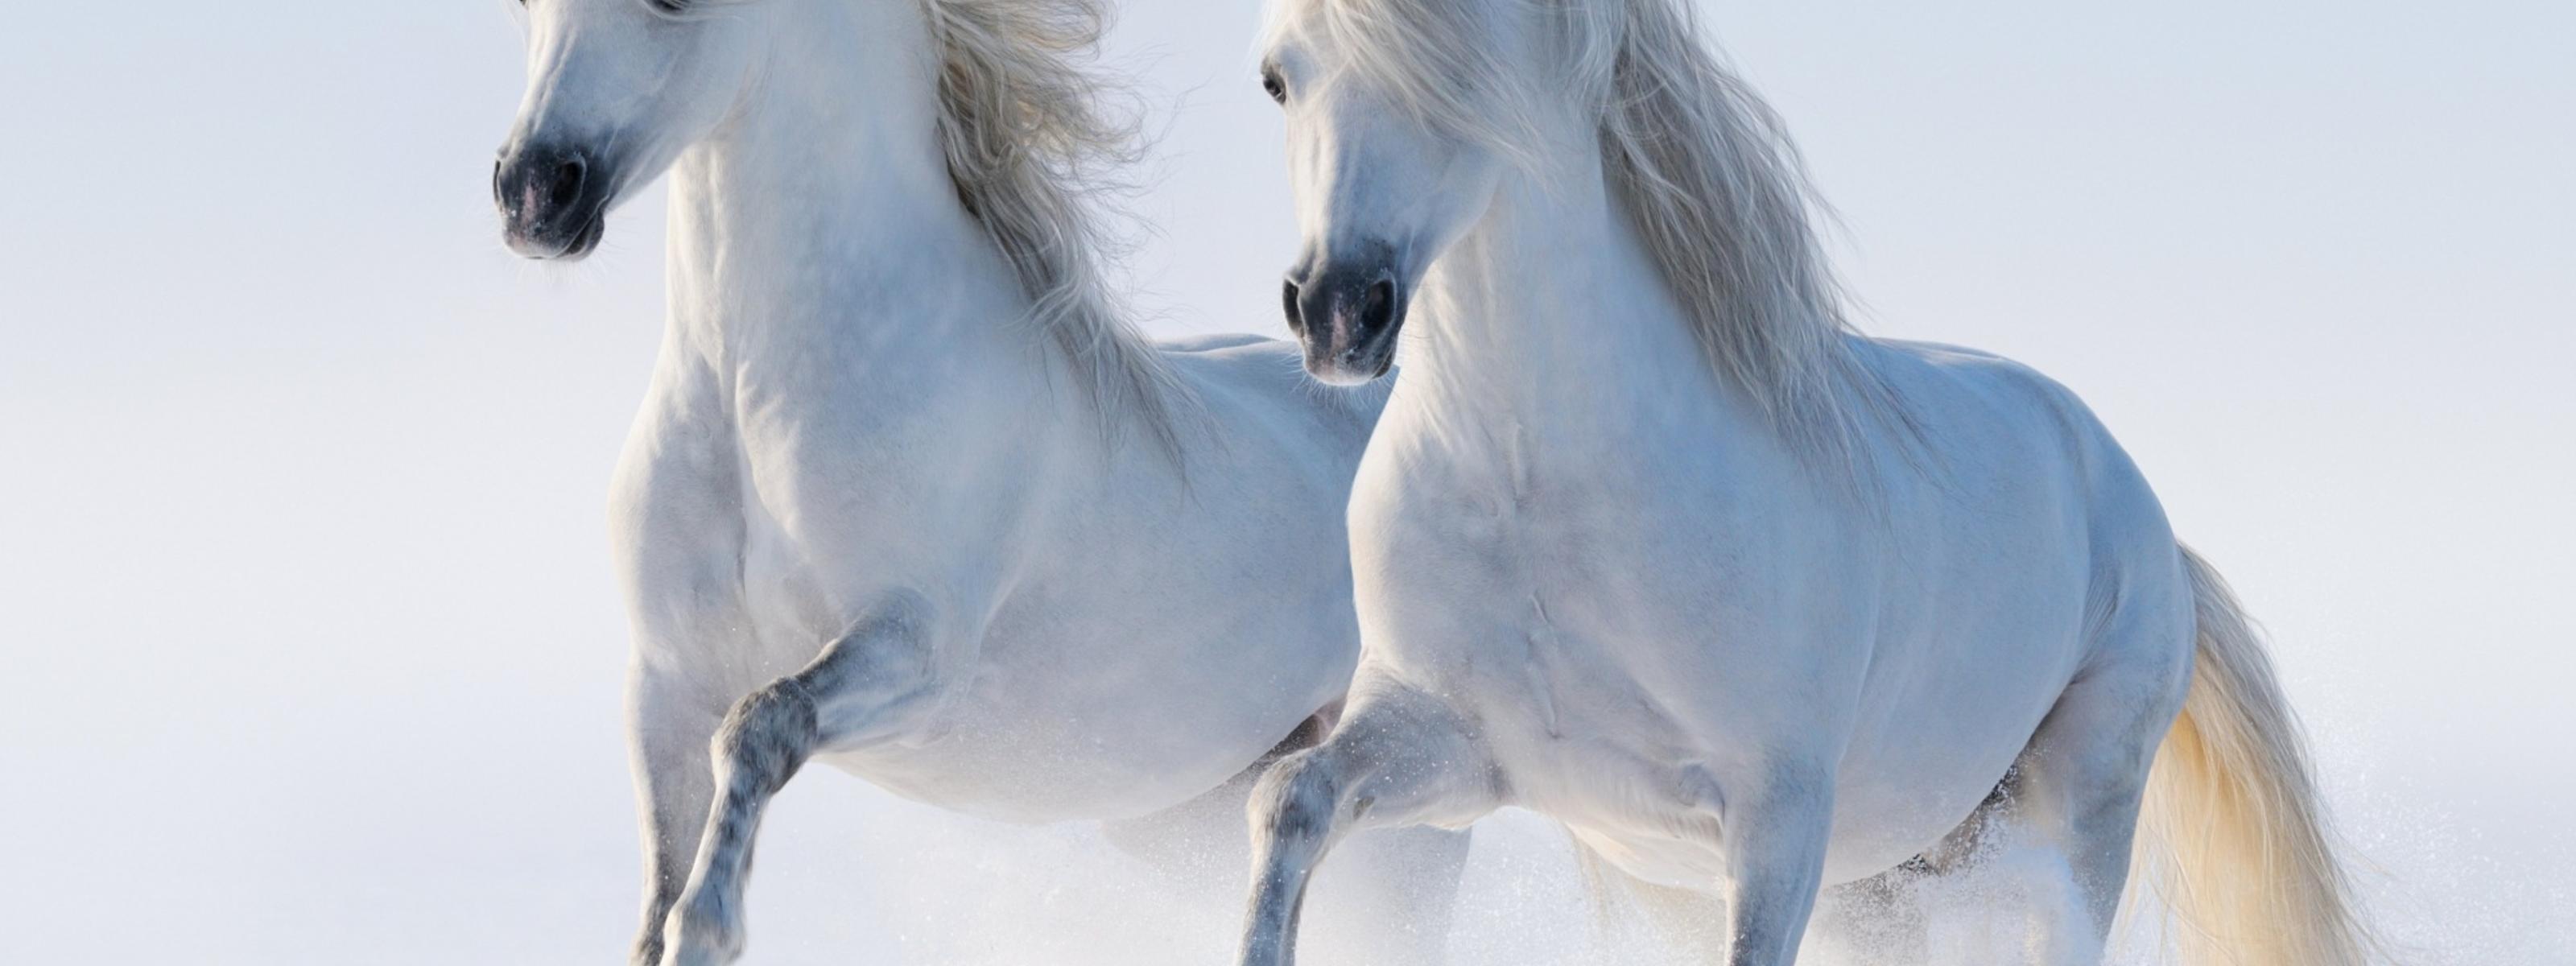 Two beautiful white horses running in the snow